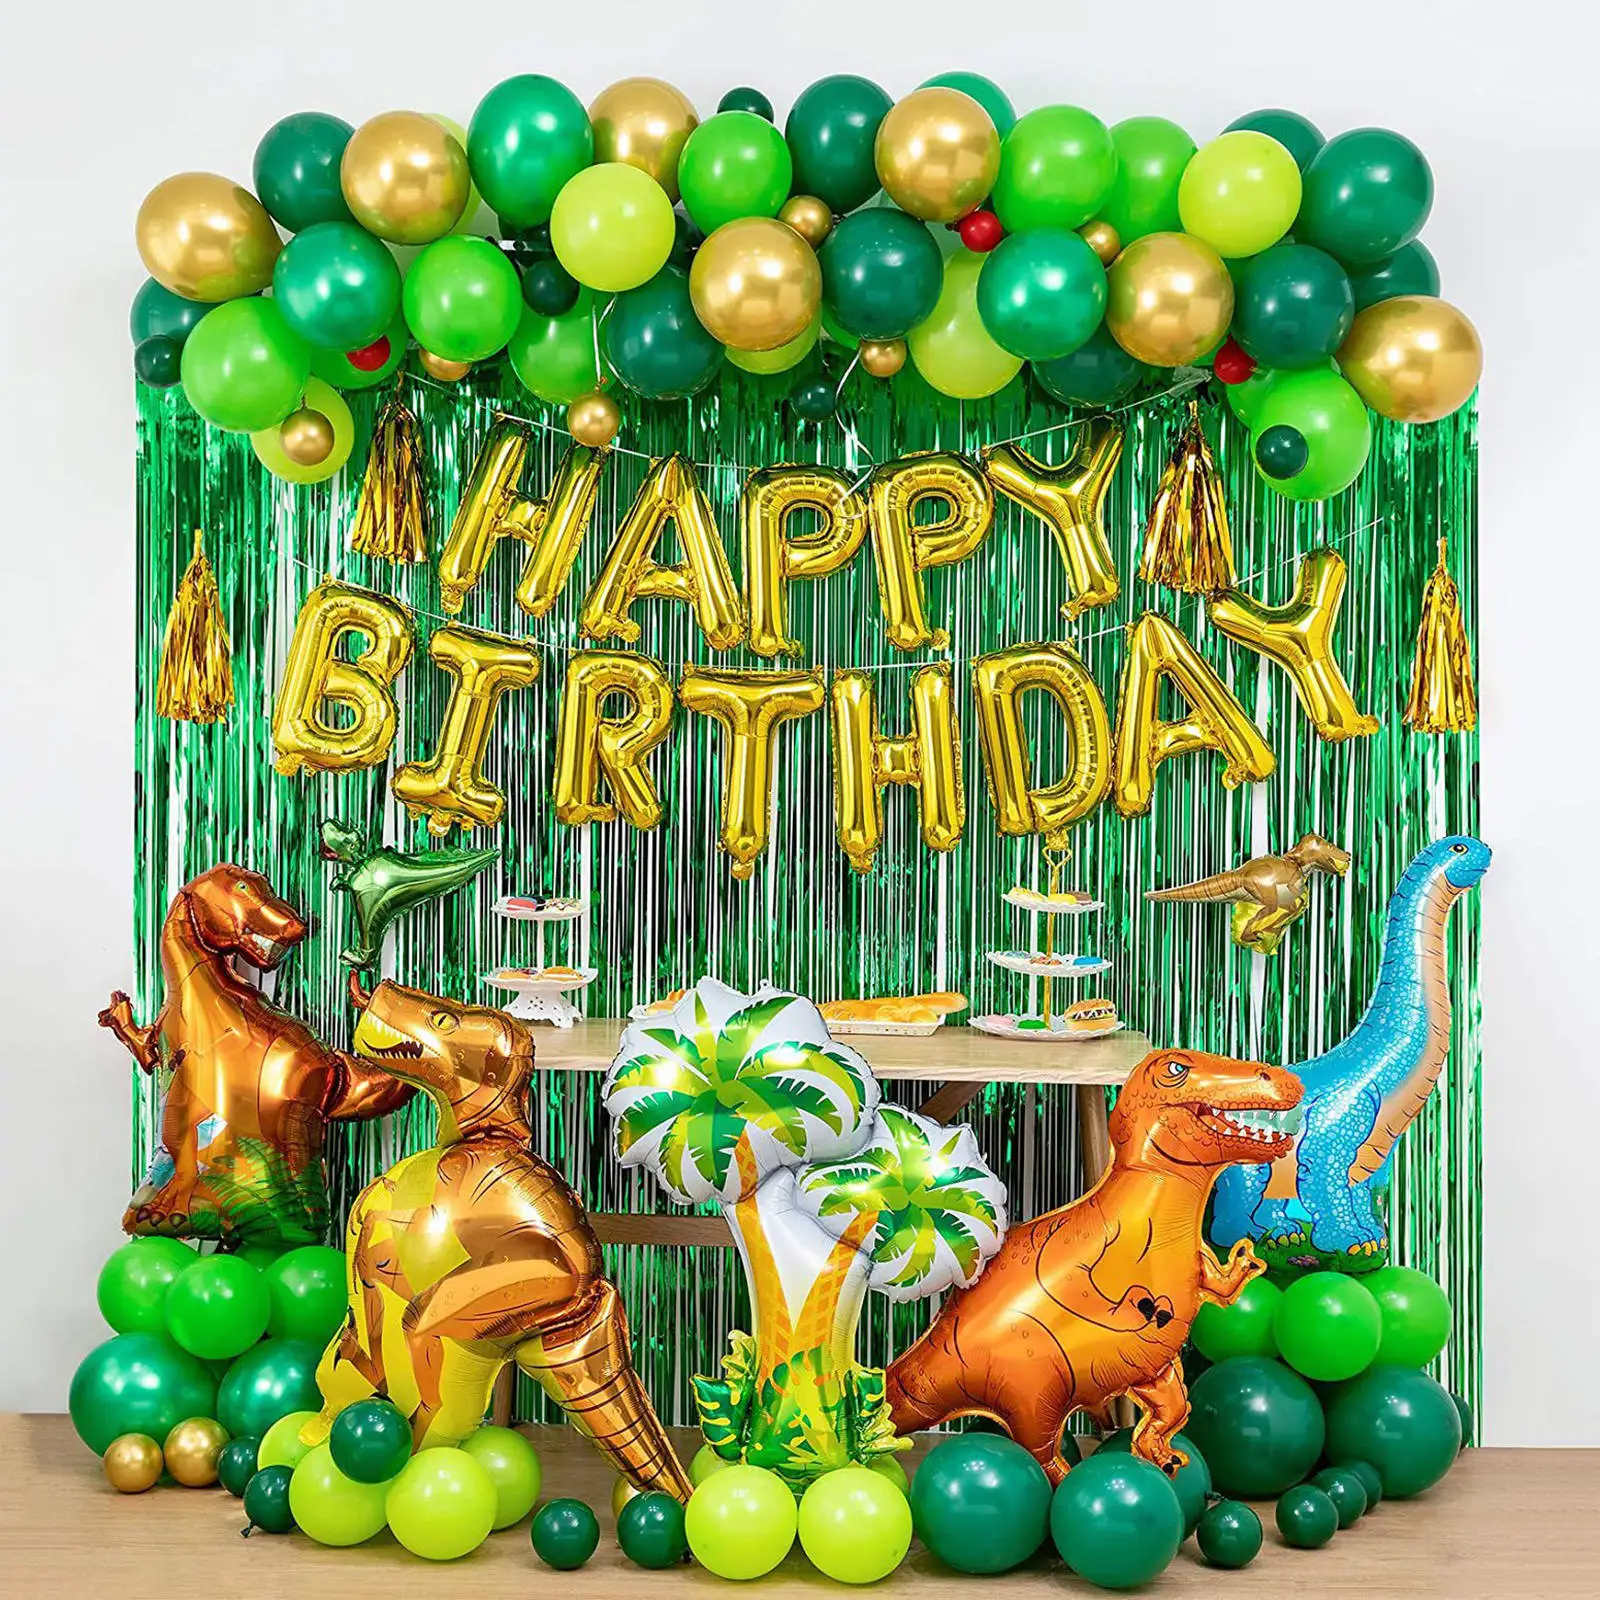 113pc Dinosaur Birthday Party Decoration Balloons Arch Garland Kit Happy Birthday Balloons foil Curtains dino Themed Party Favor